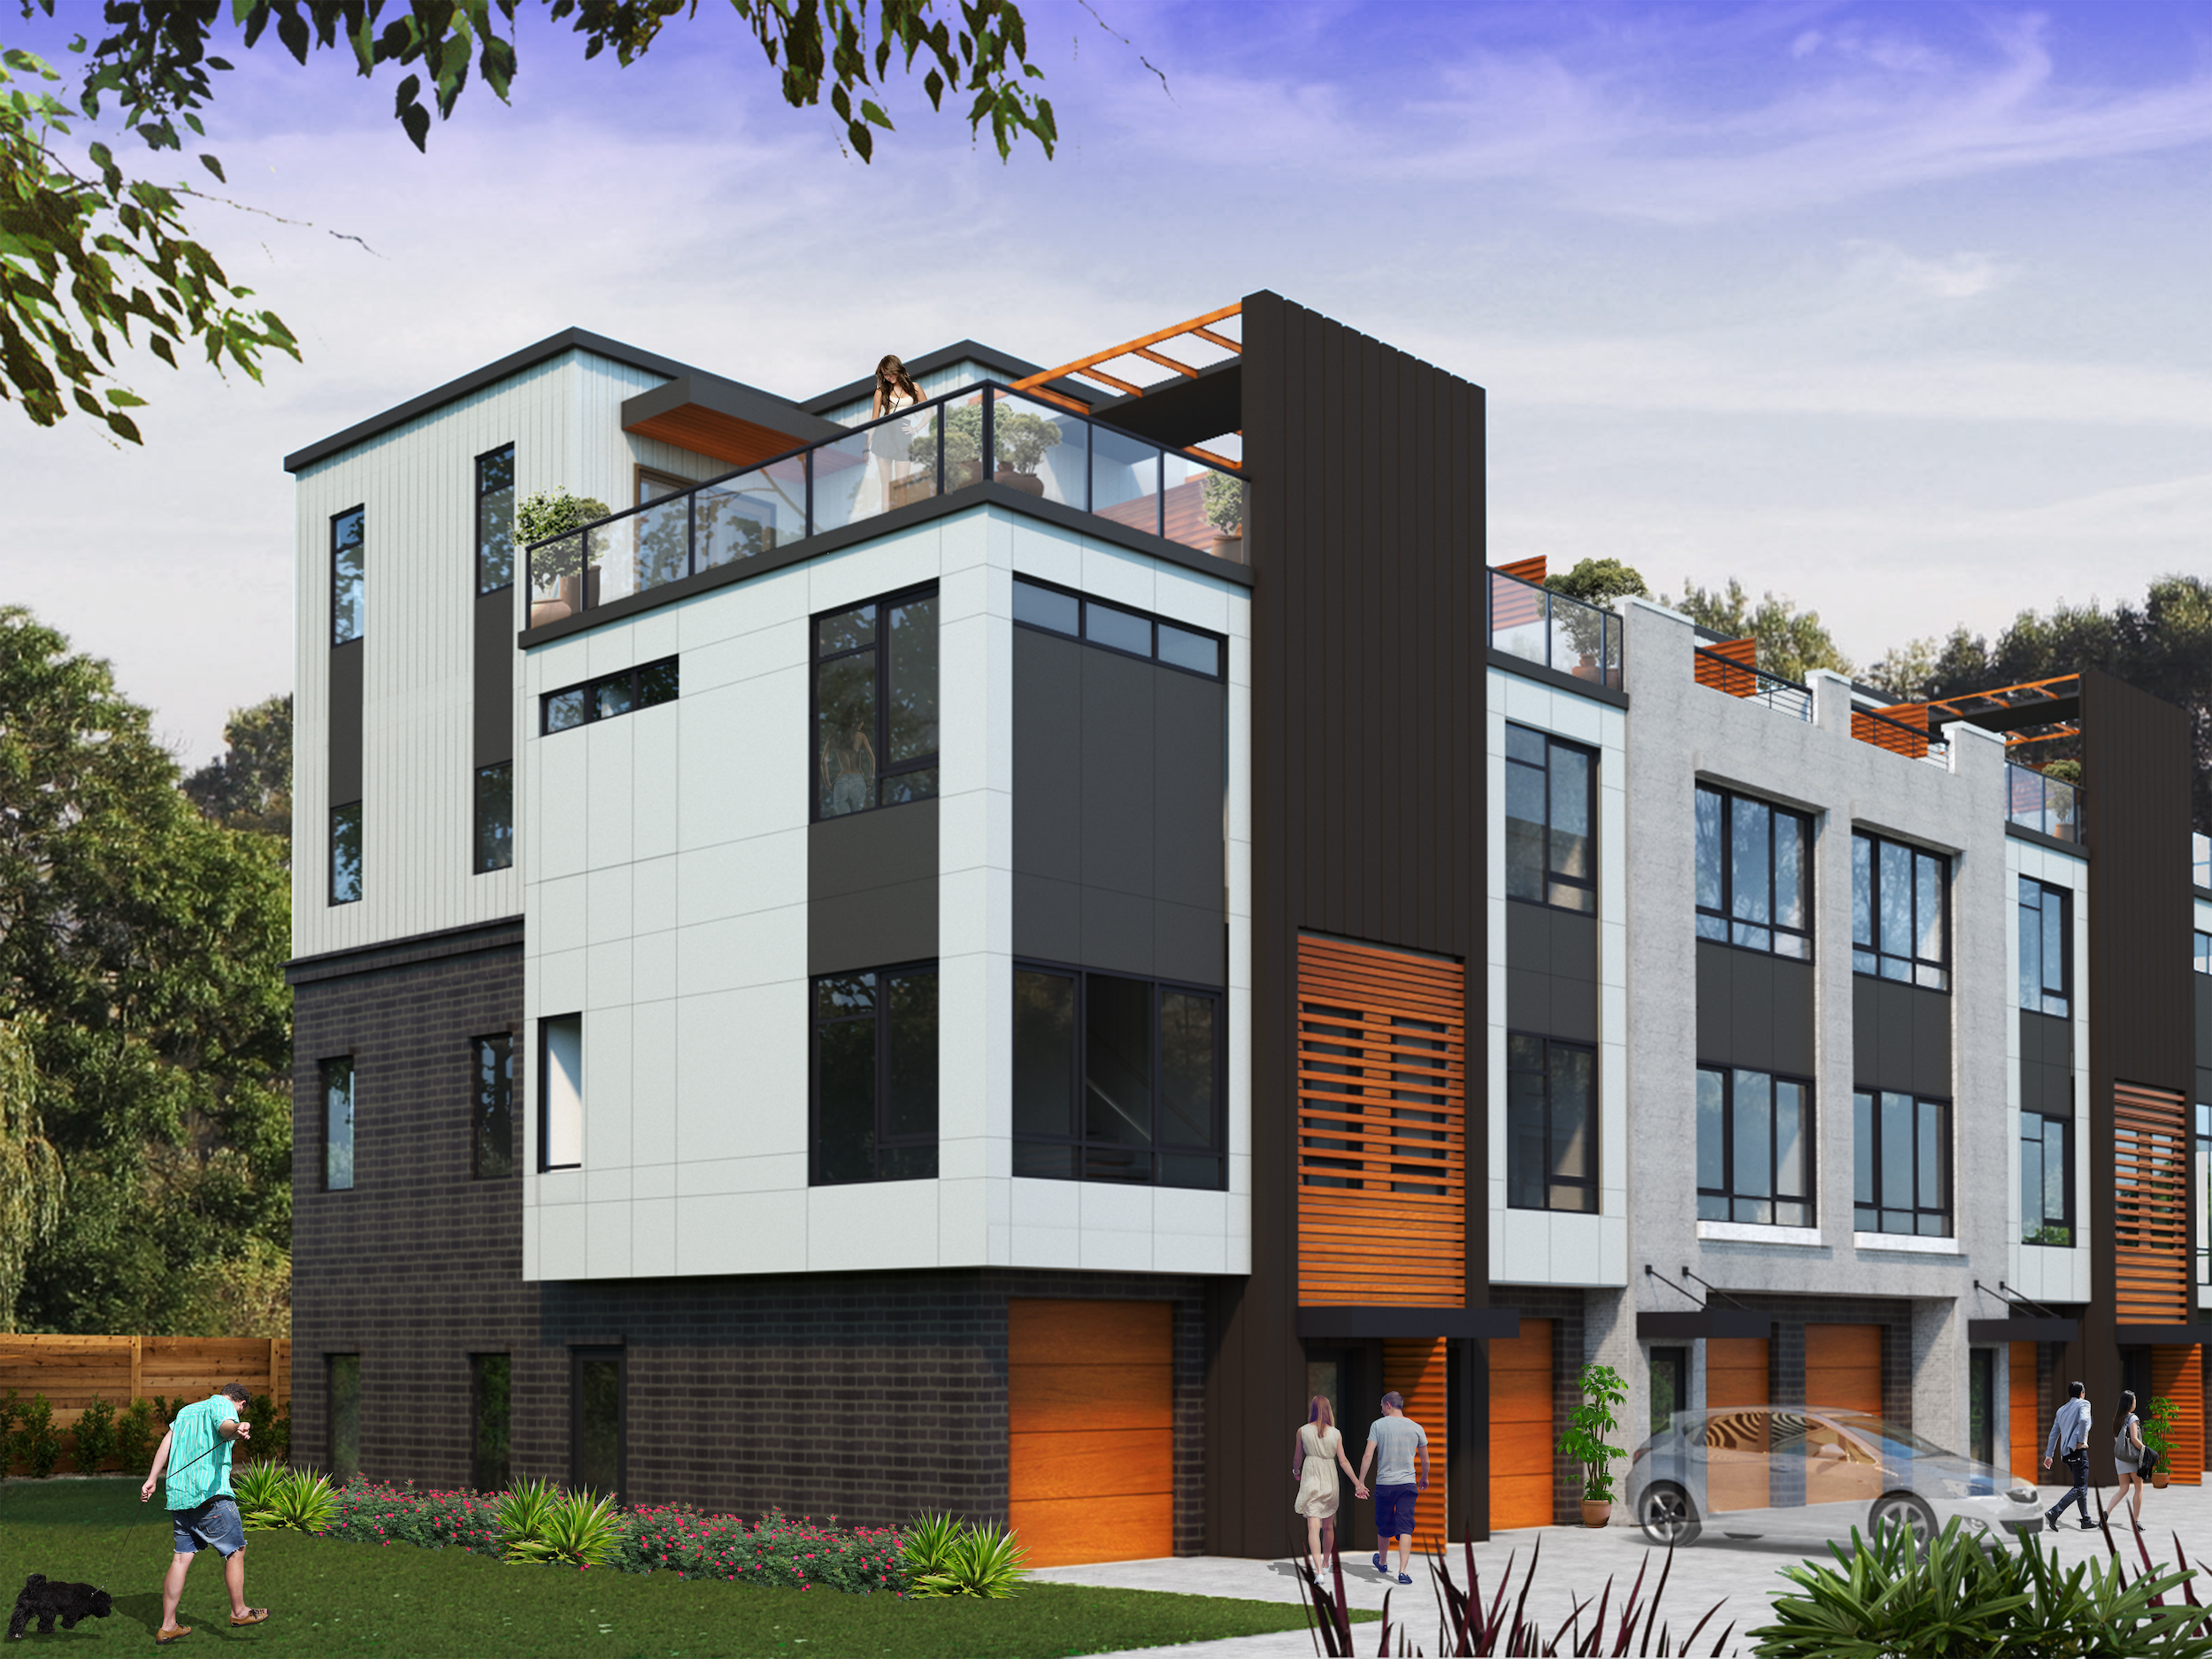 A new townhouse development pitched in the Old Fourth Ward near Boulevard. 